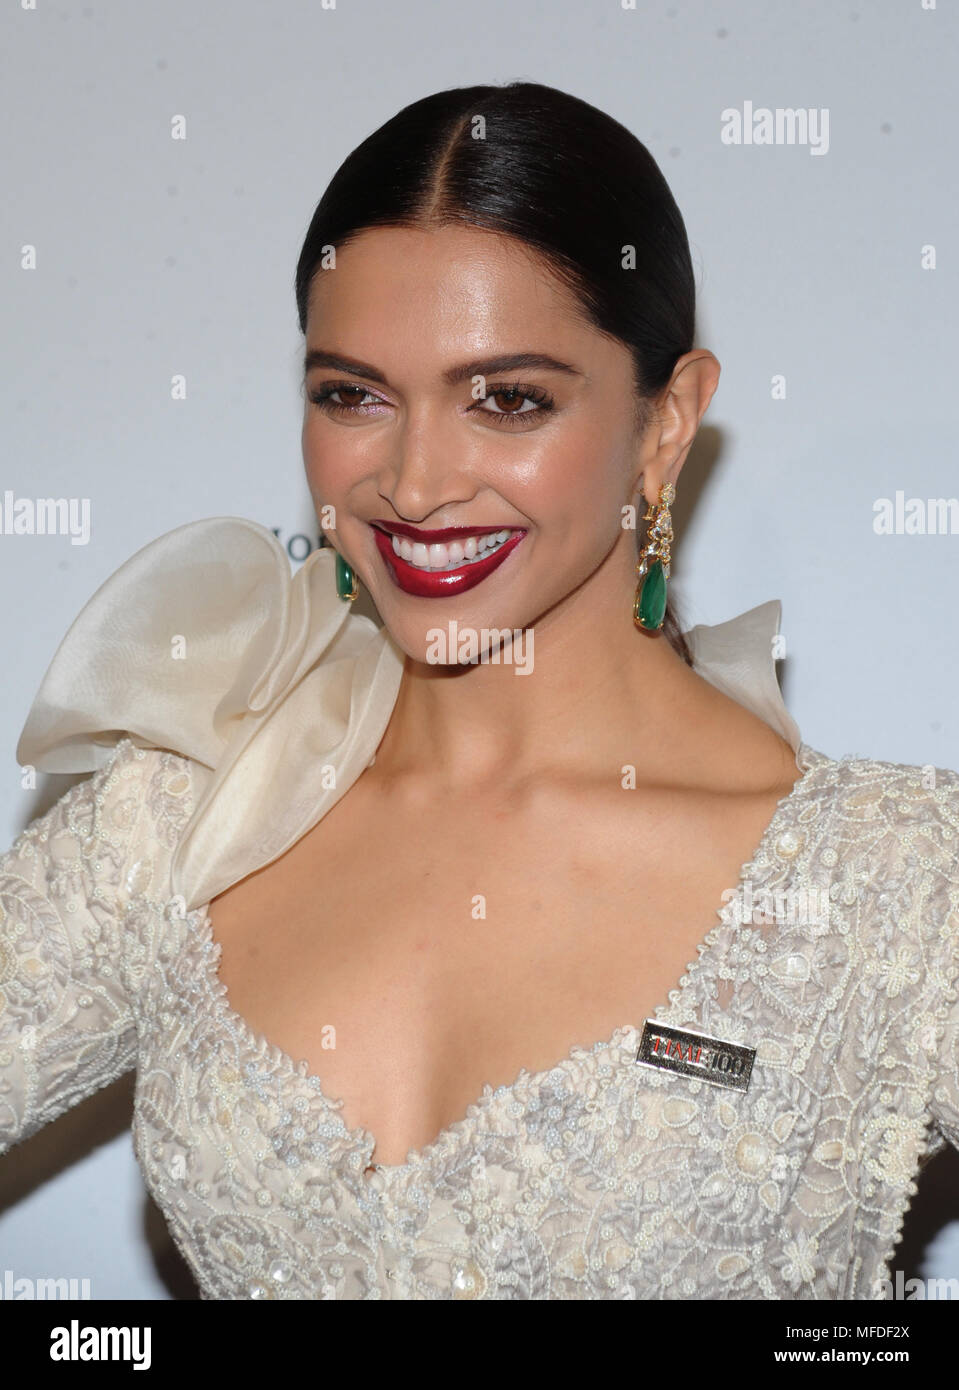 New York, NY, USA. 23rd Apr, 2018. Deepika Padukone attends the 2018 Time 100 Gala at Jazz at Lincoln Center on April 24, 2018 in New York City. Credit: John Palmer/Media Punch/Alamy Live News Stock Photo